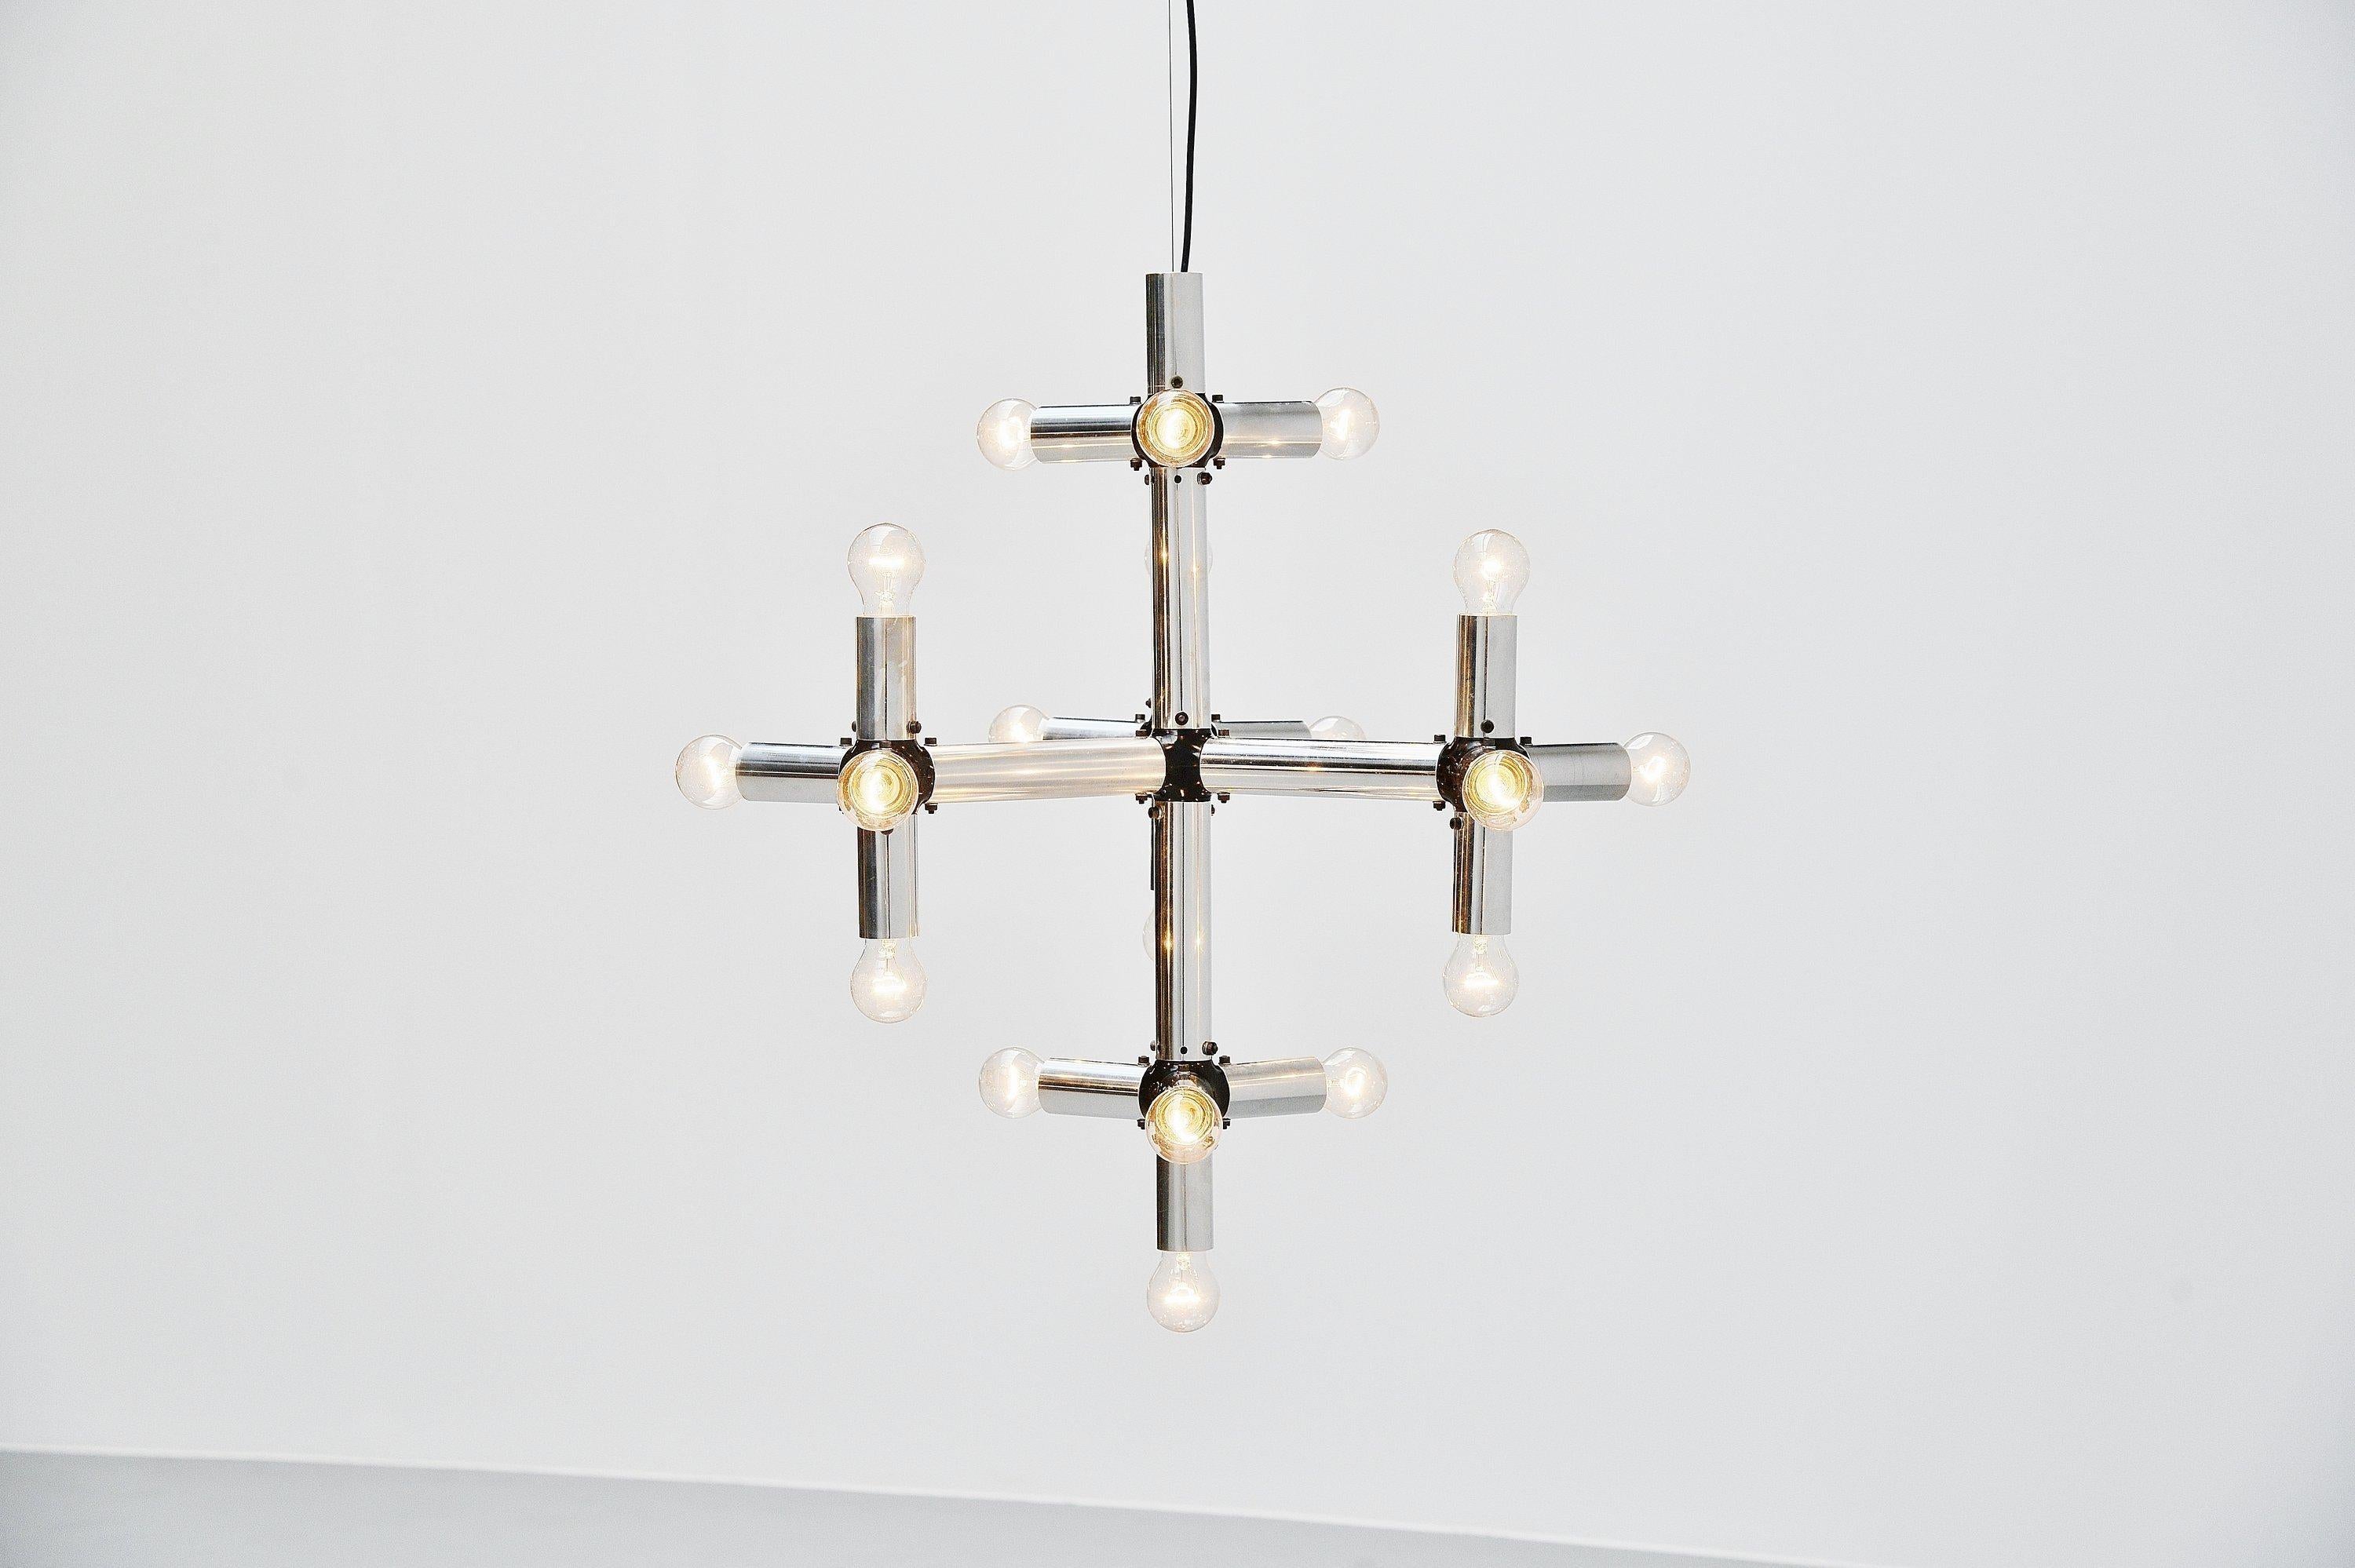 Sculptural ‘lichtstruktur’ chandelier designed by Robert Haussmann and manufactured by Swiss lamp, Switzerland, 1969. The lamp was designed by the architect Robert Haussmann and it was a modular system, could be built however wanted. Was often used